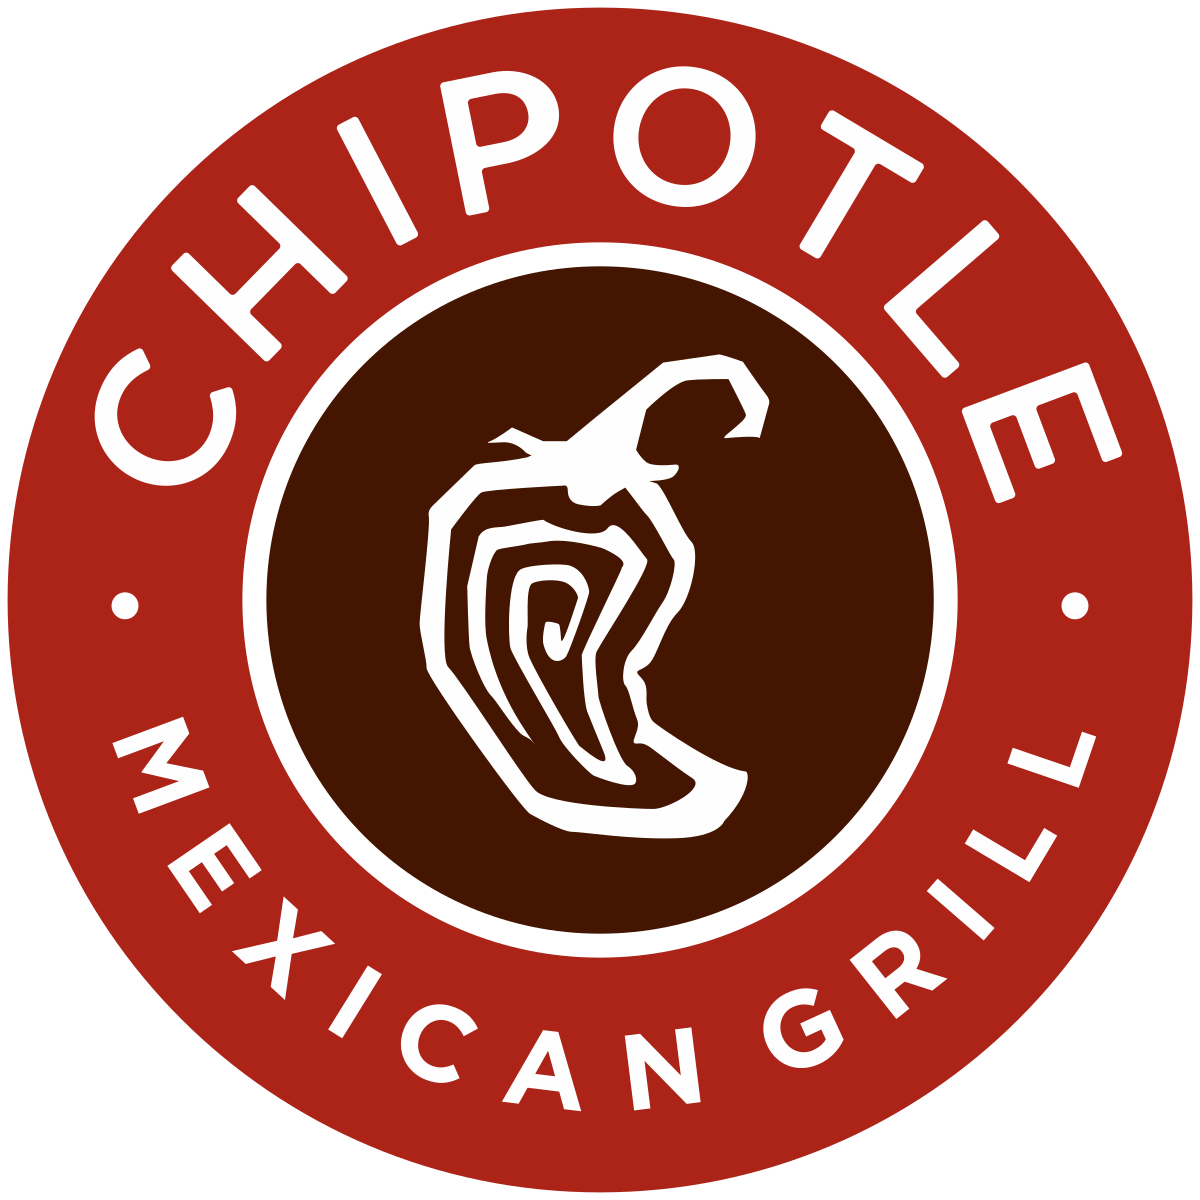 is chipotle mexican grill halal in the United States?